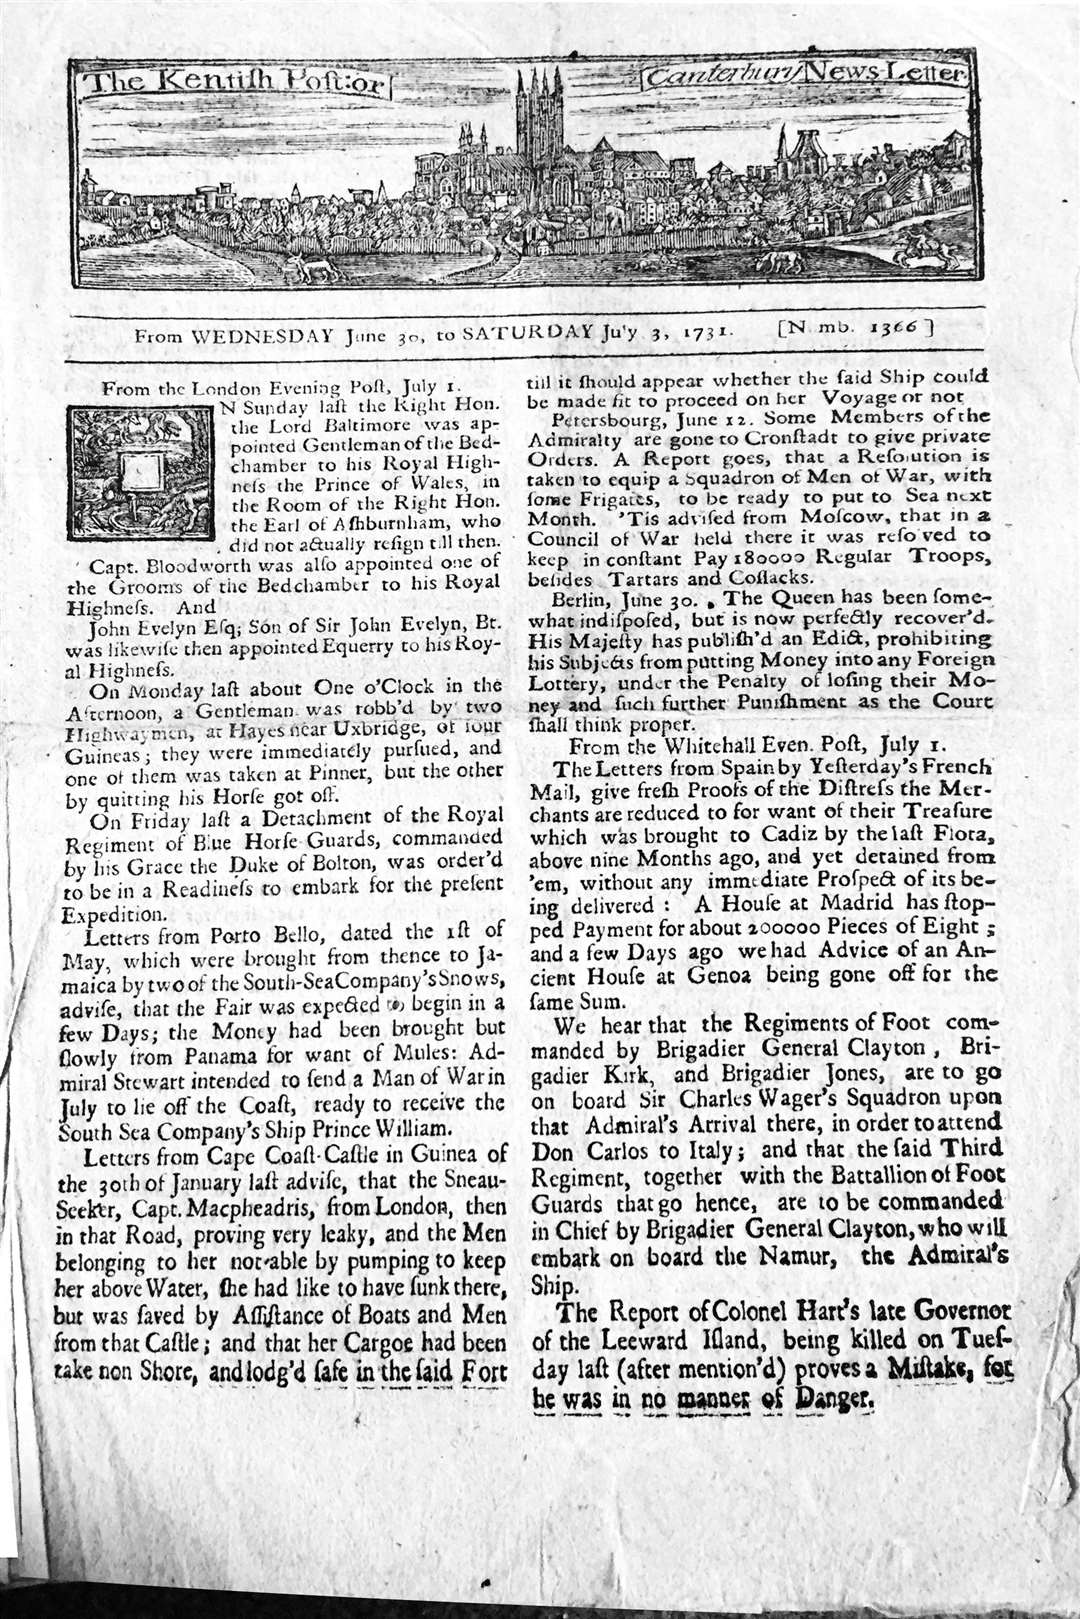 An early copy of the Kentish Post, the forerunner of the Kentish Gazette